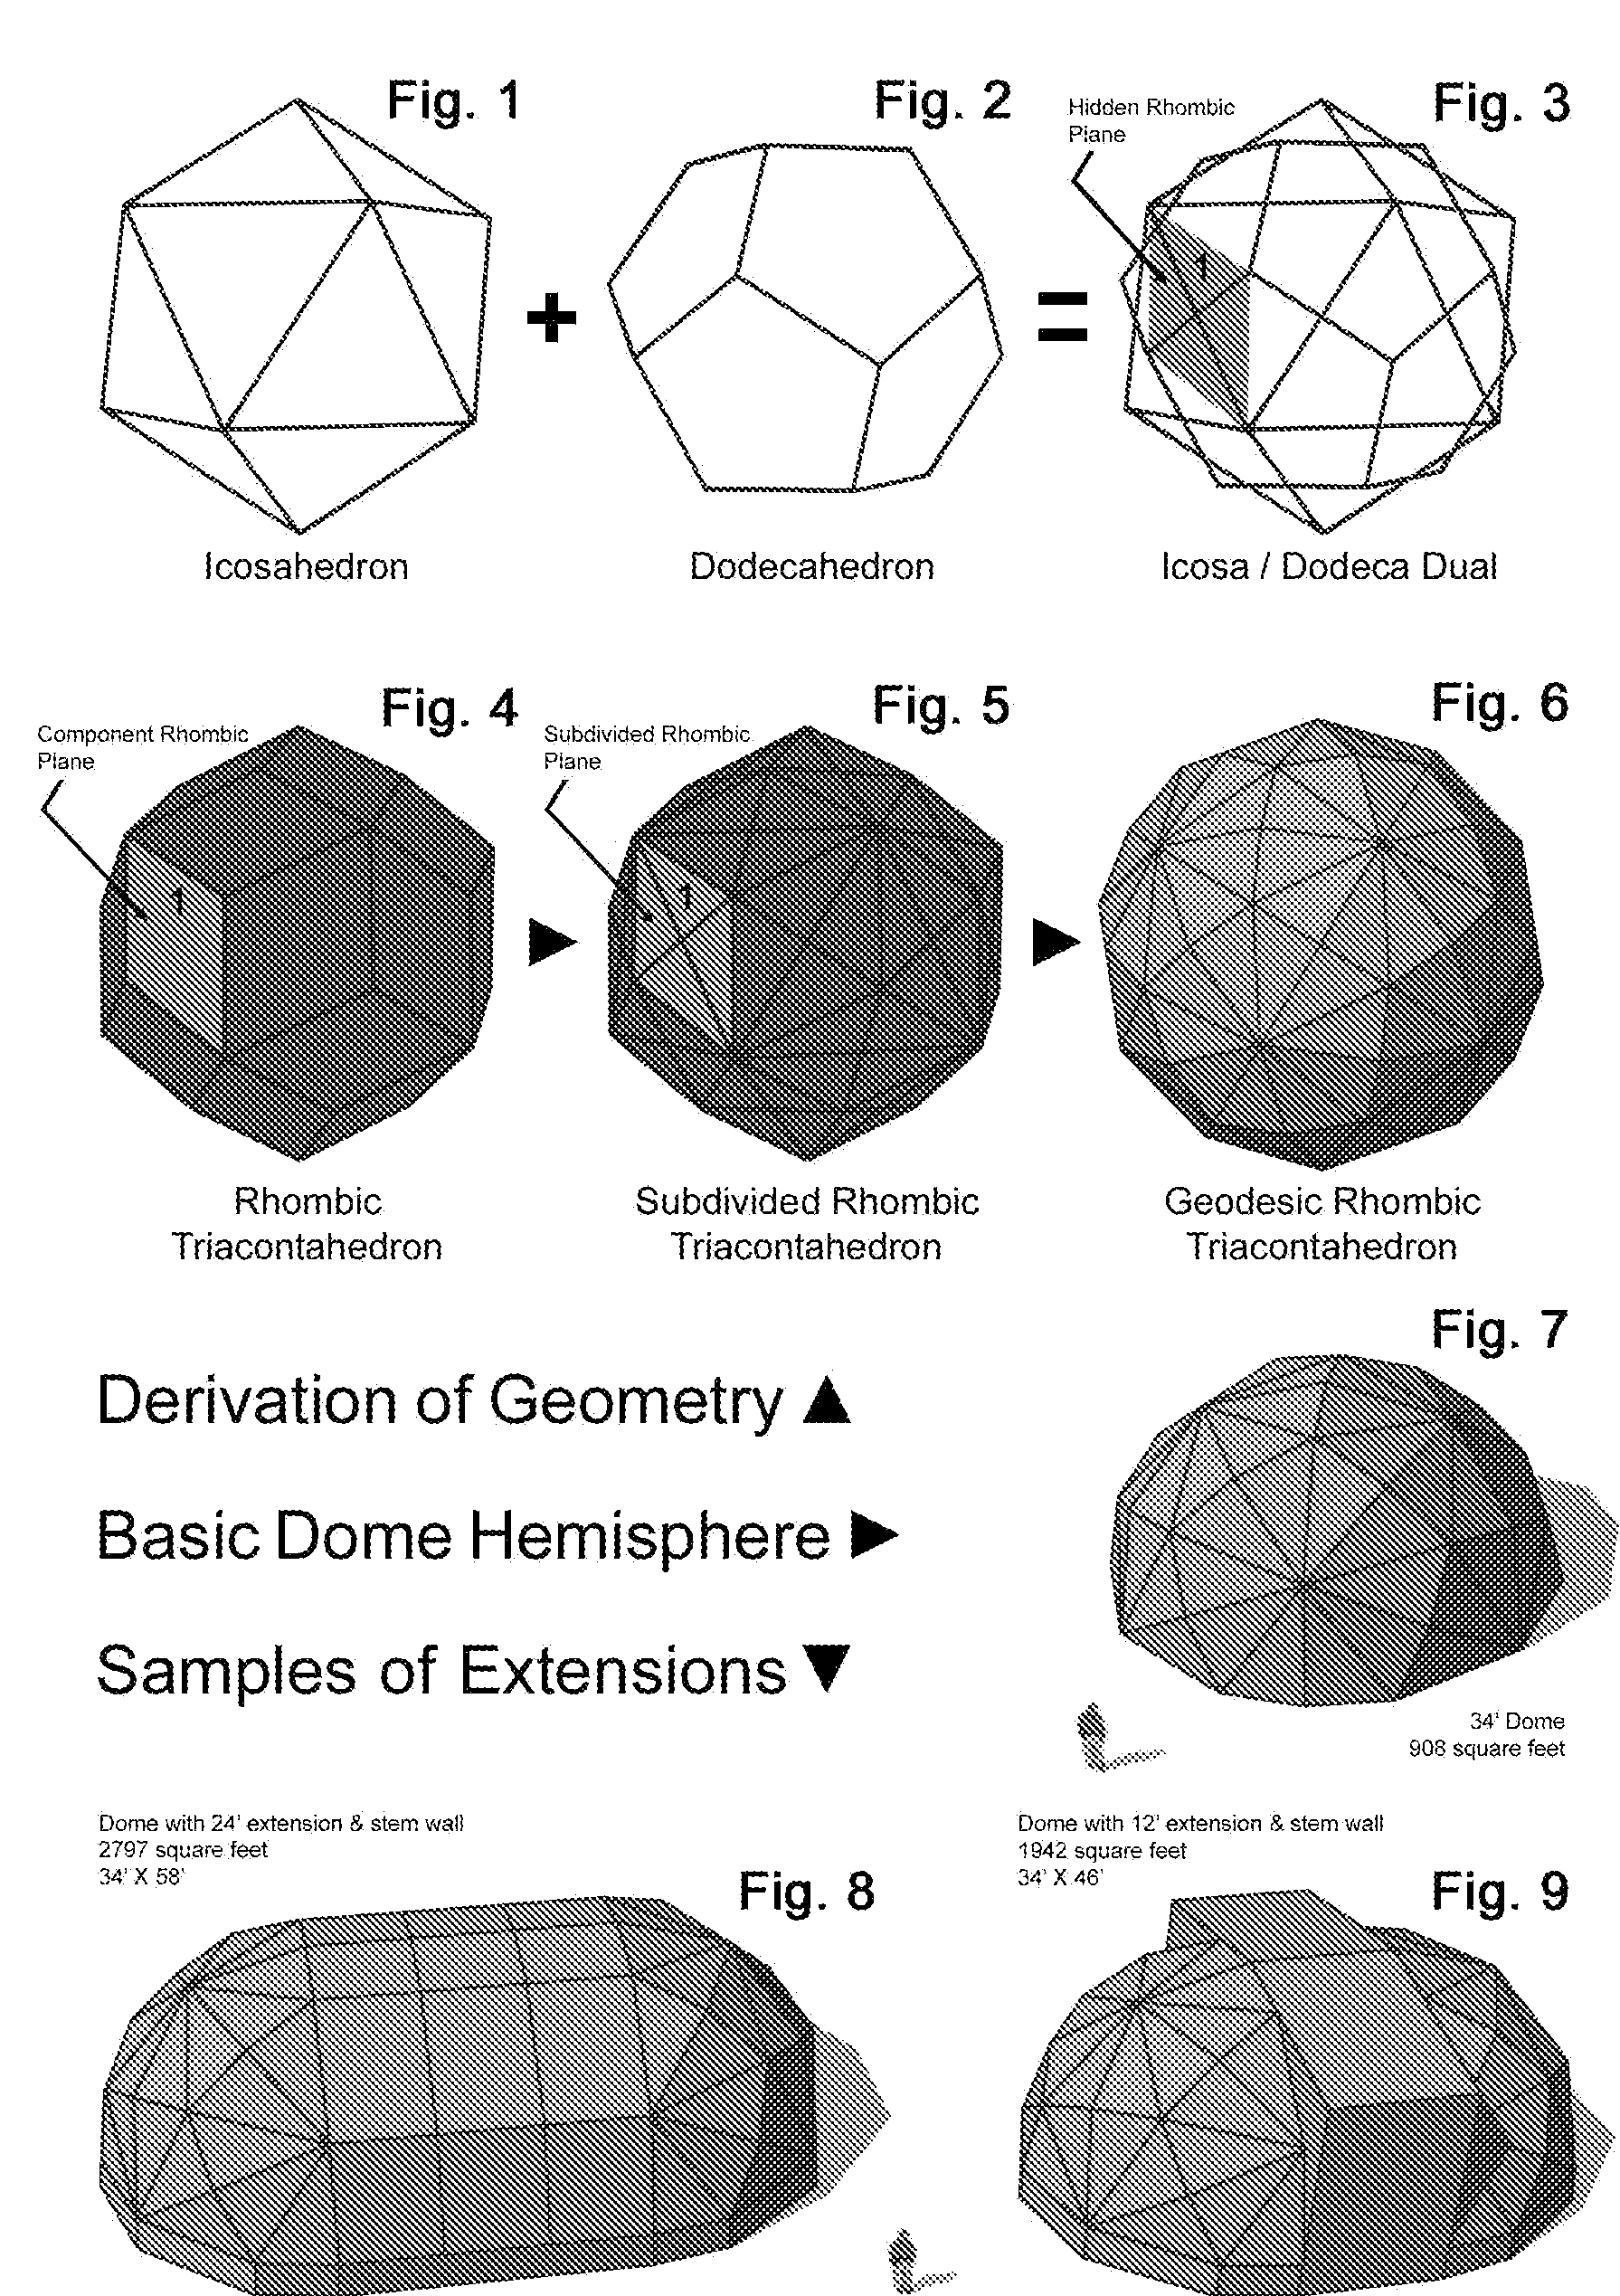 Means and methods for construction and use of geodesic rhombic triacontahedron